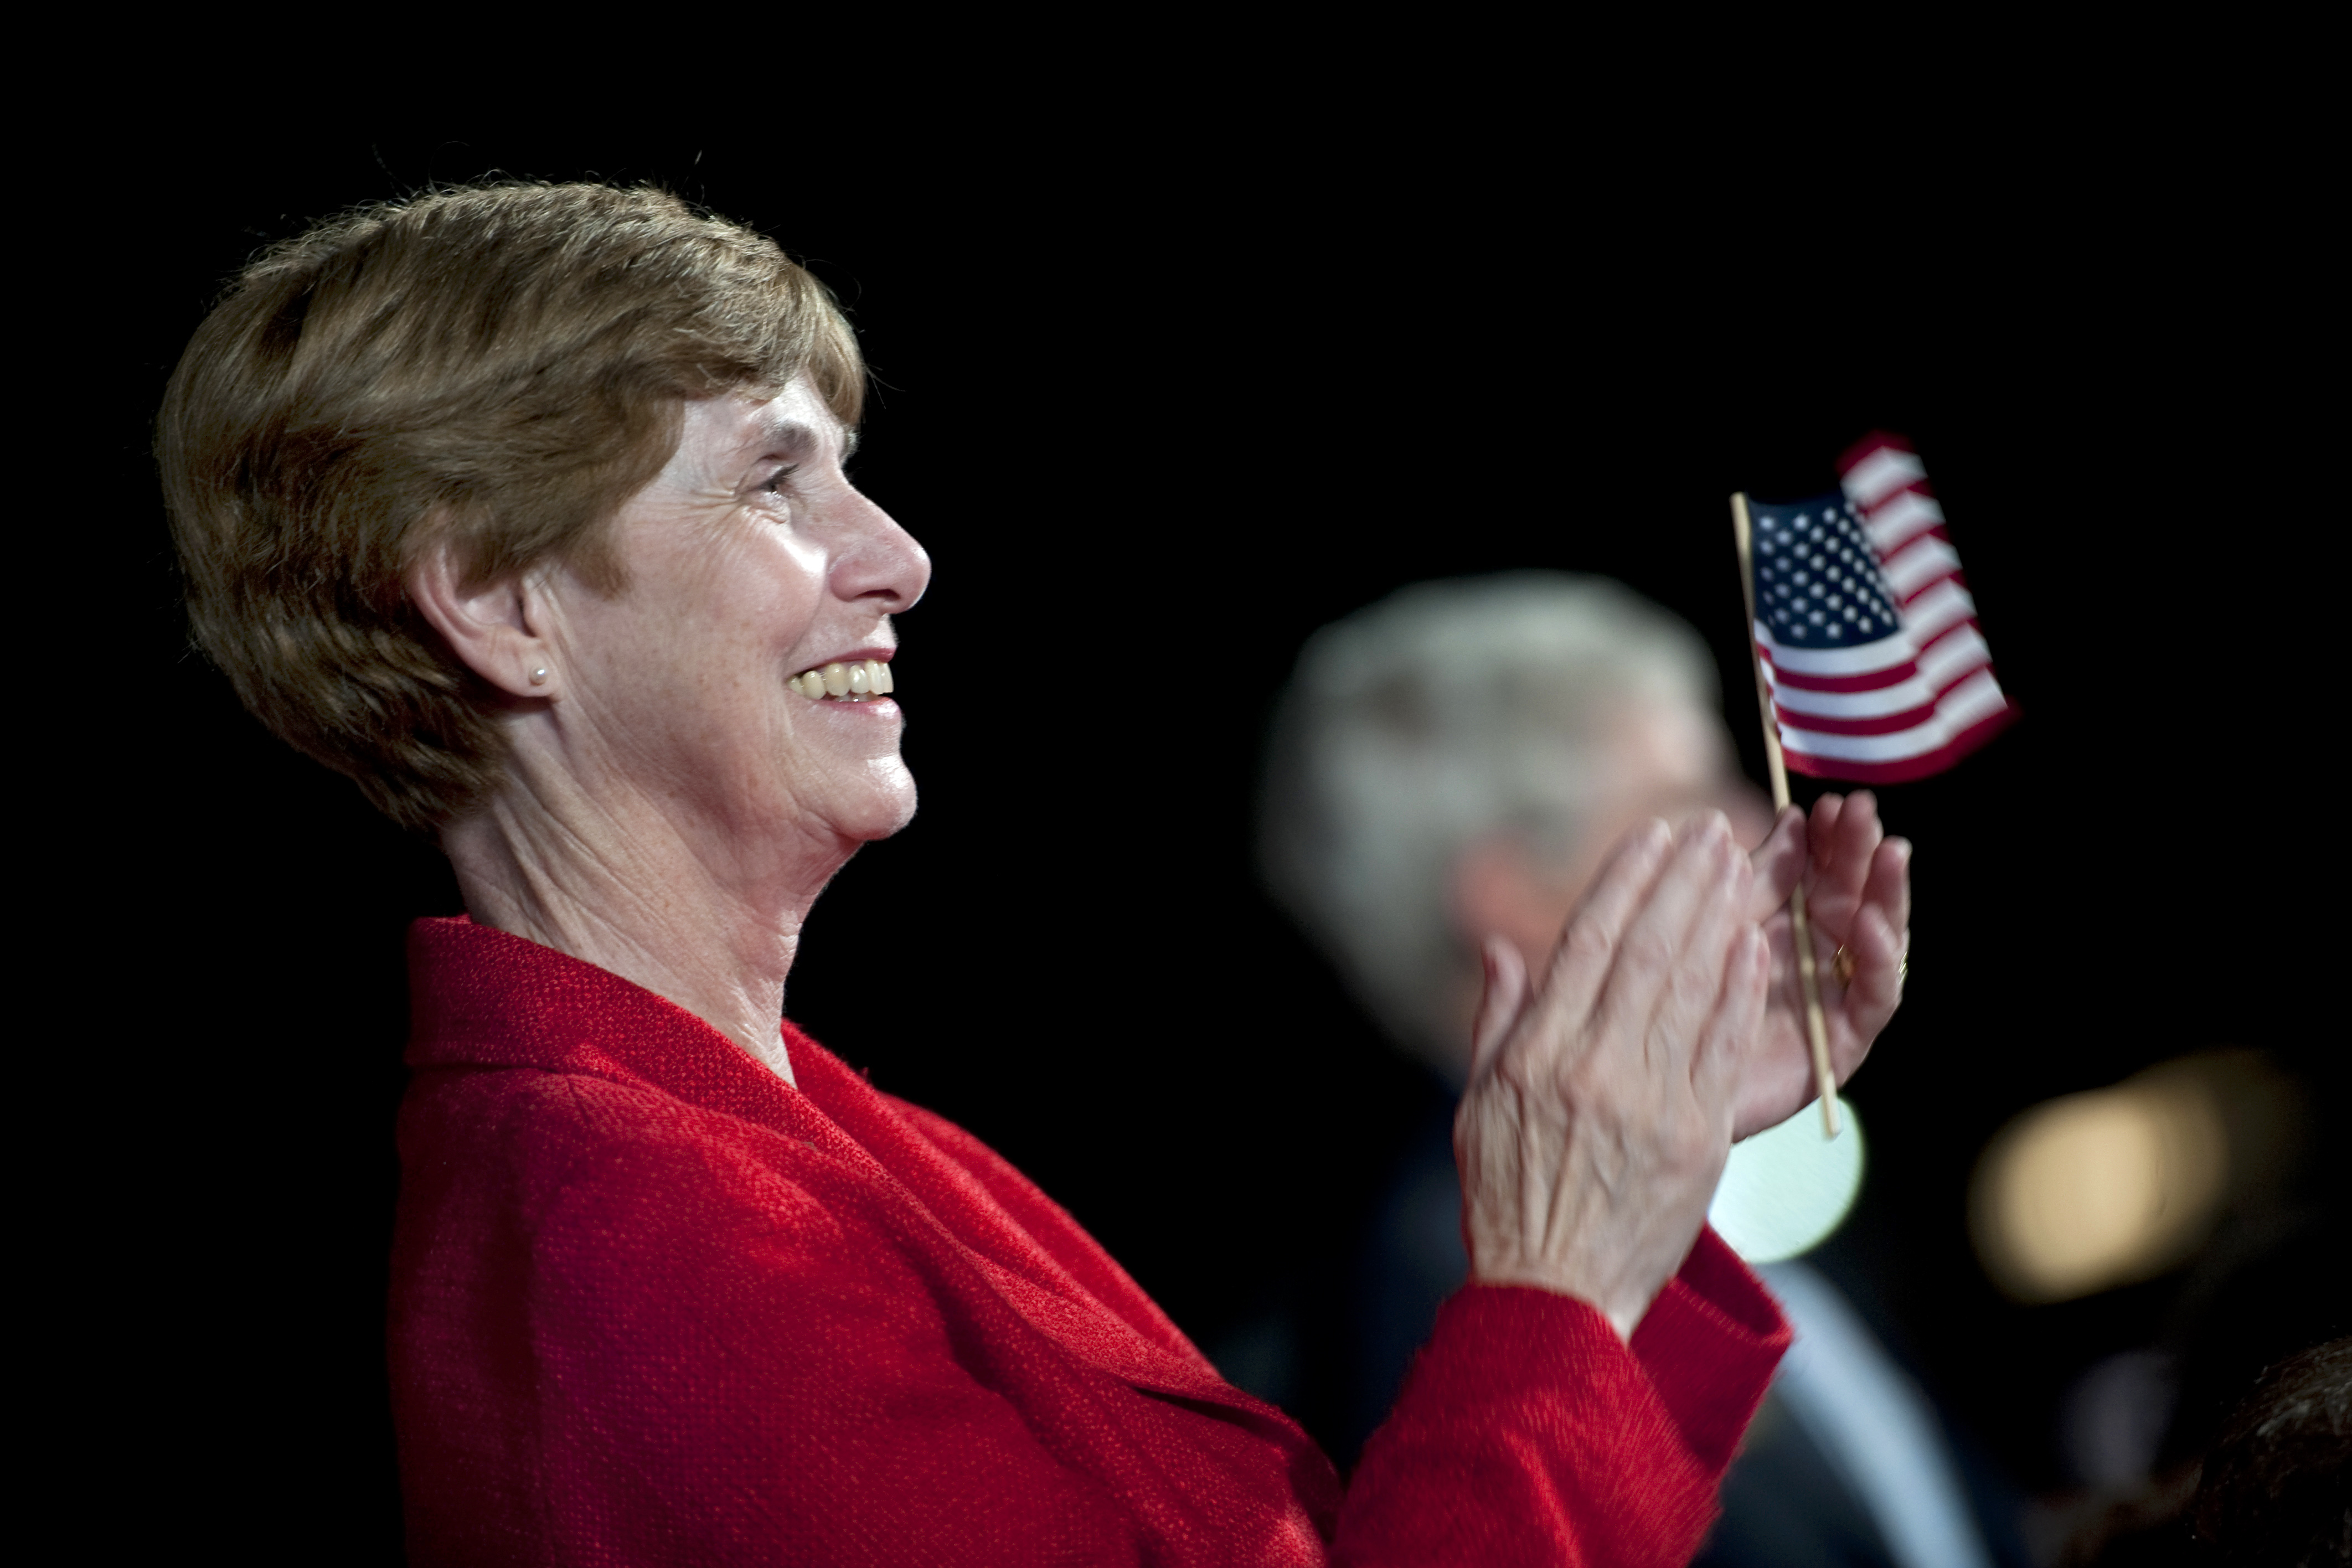 Deborah Mullen claps during the playing of the Armed Service Medley, 2011